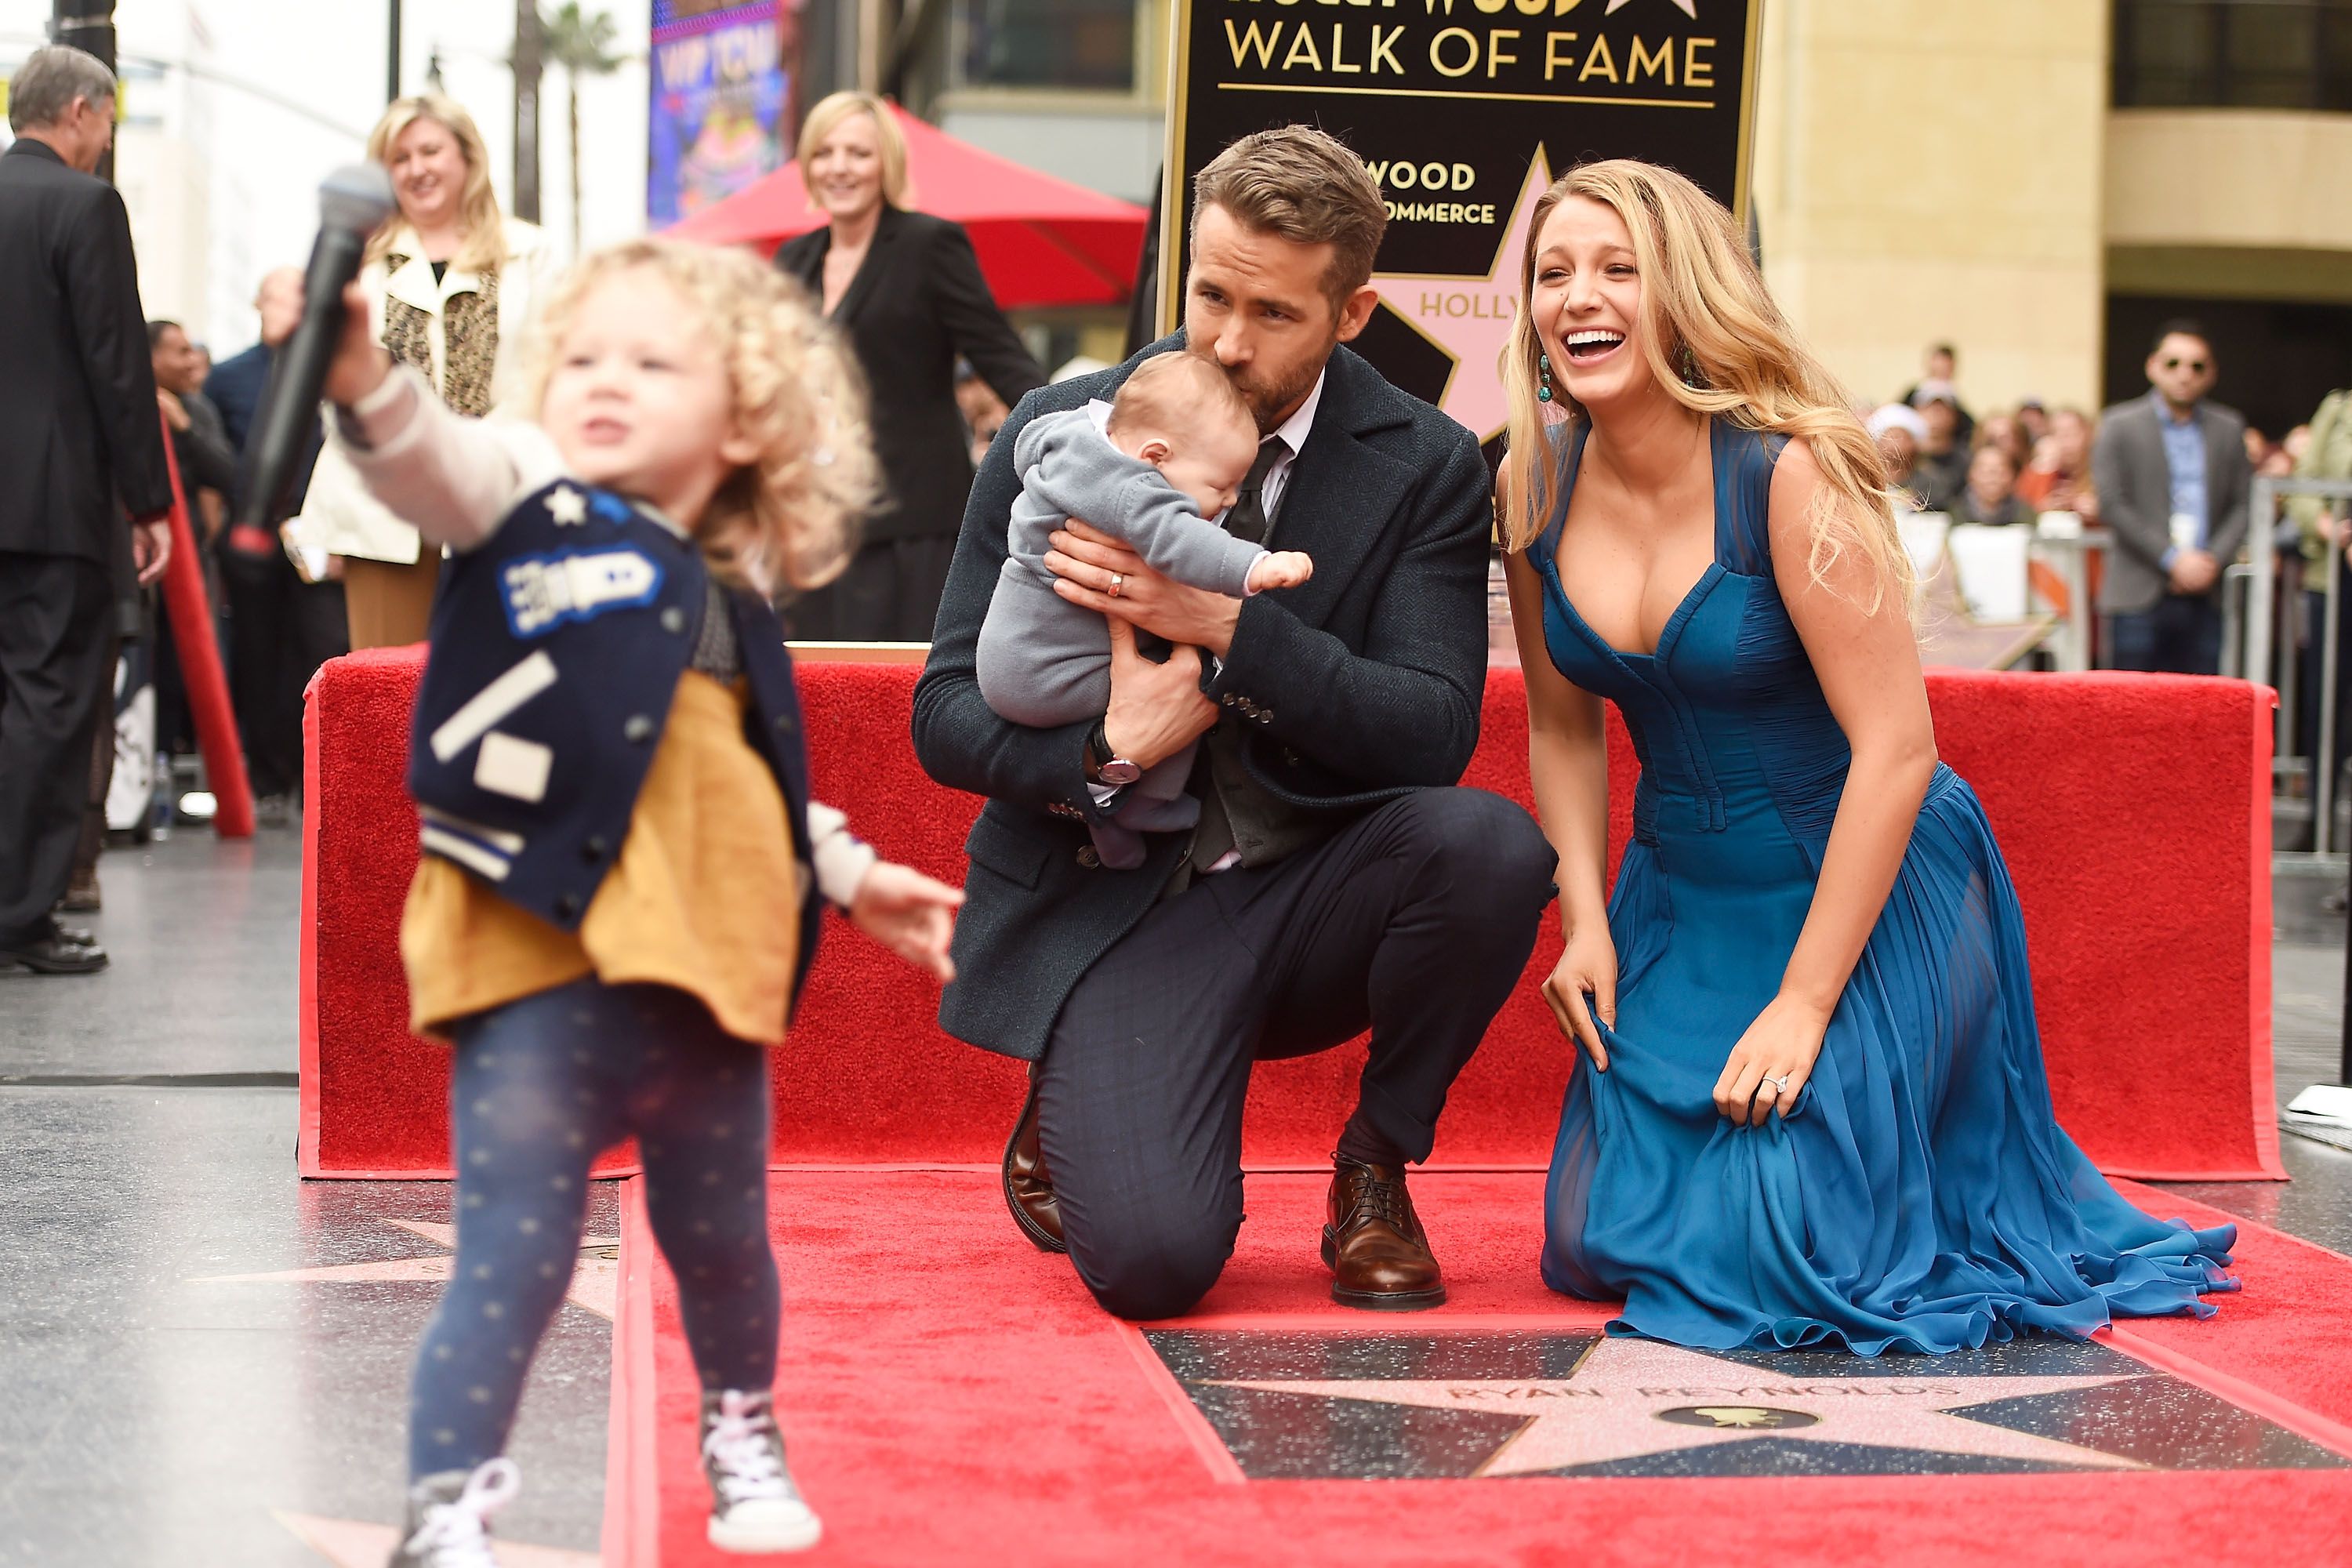 Blake Lively and Ryan Reynolds's Relationship: A Complete Timeline